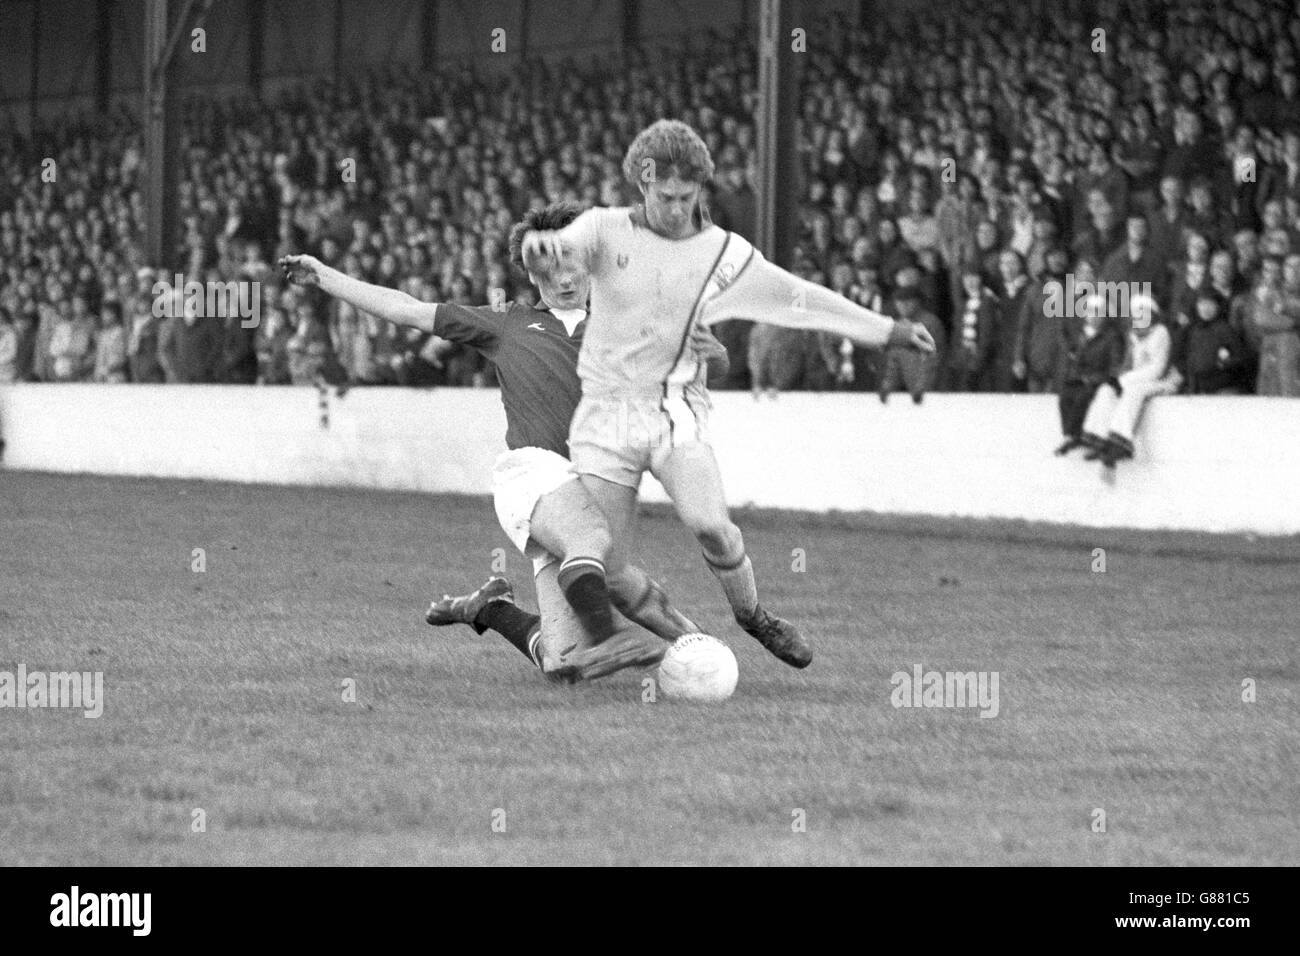 Soccer - League Division Two - Leyton Orient v Nottingham Forest - Brisbane Road. Tony Woodcock in action for Nottingham Forest. Stock Photo